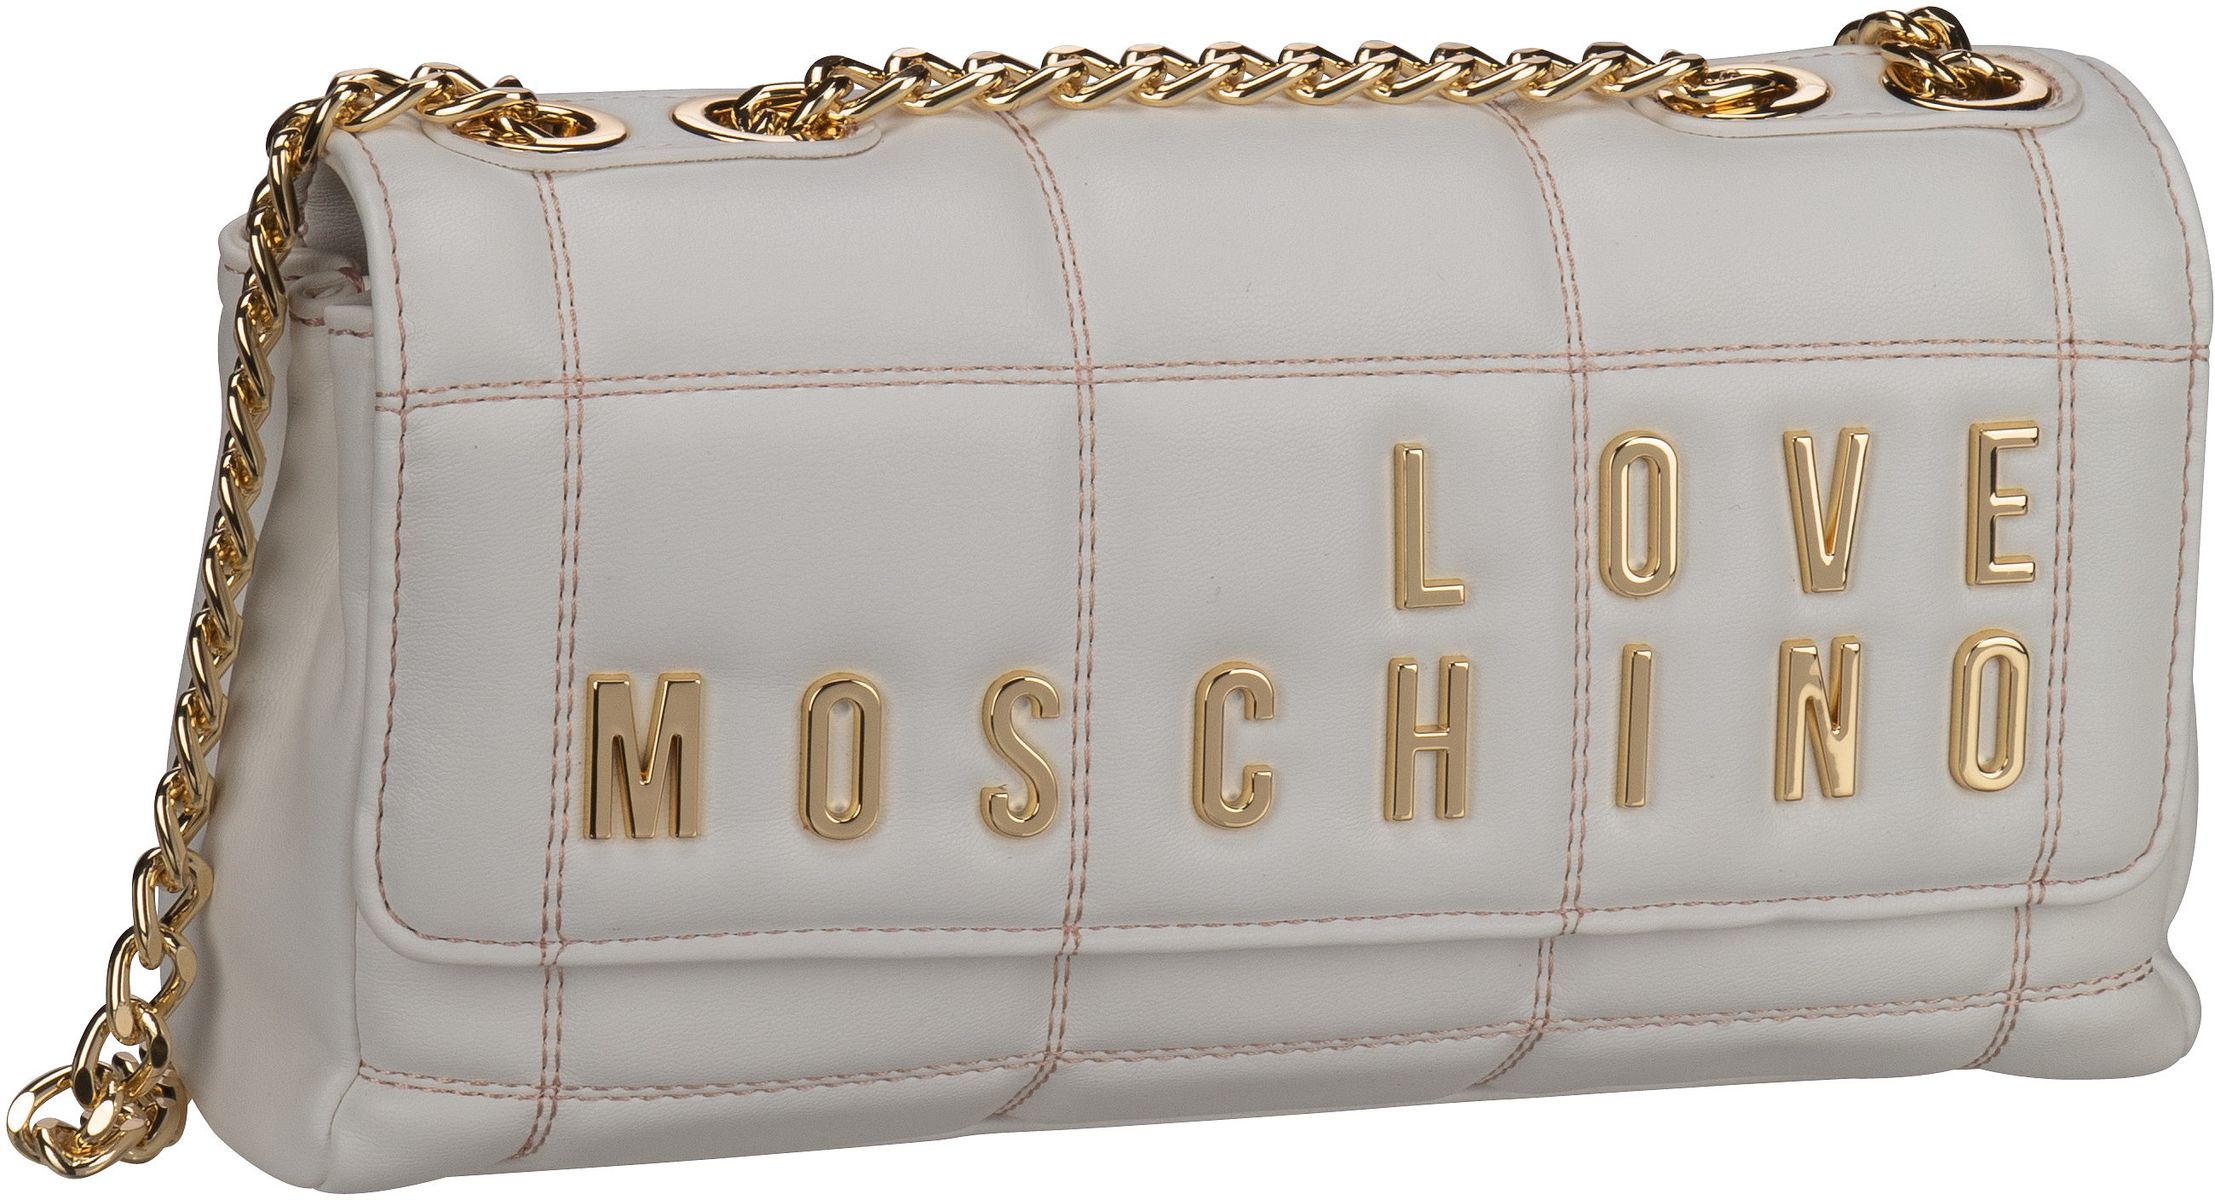 Love Moschino Embroidery Quilted Shoulder Bag 4260 - White